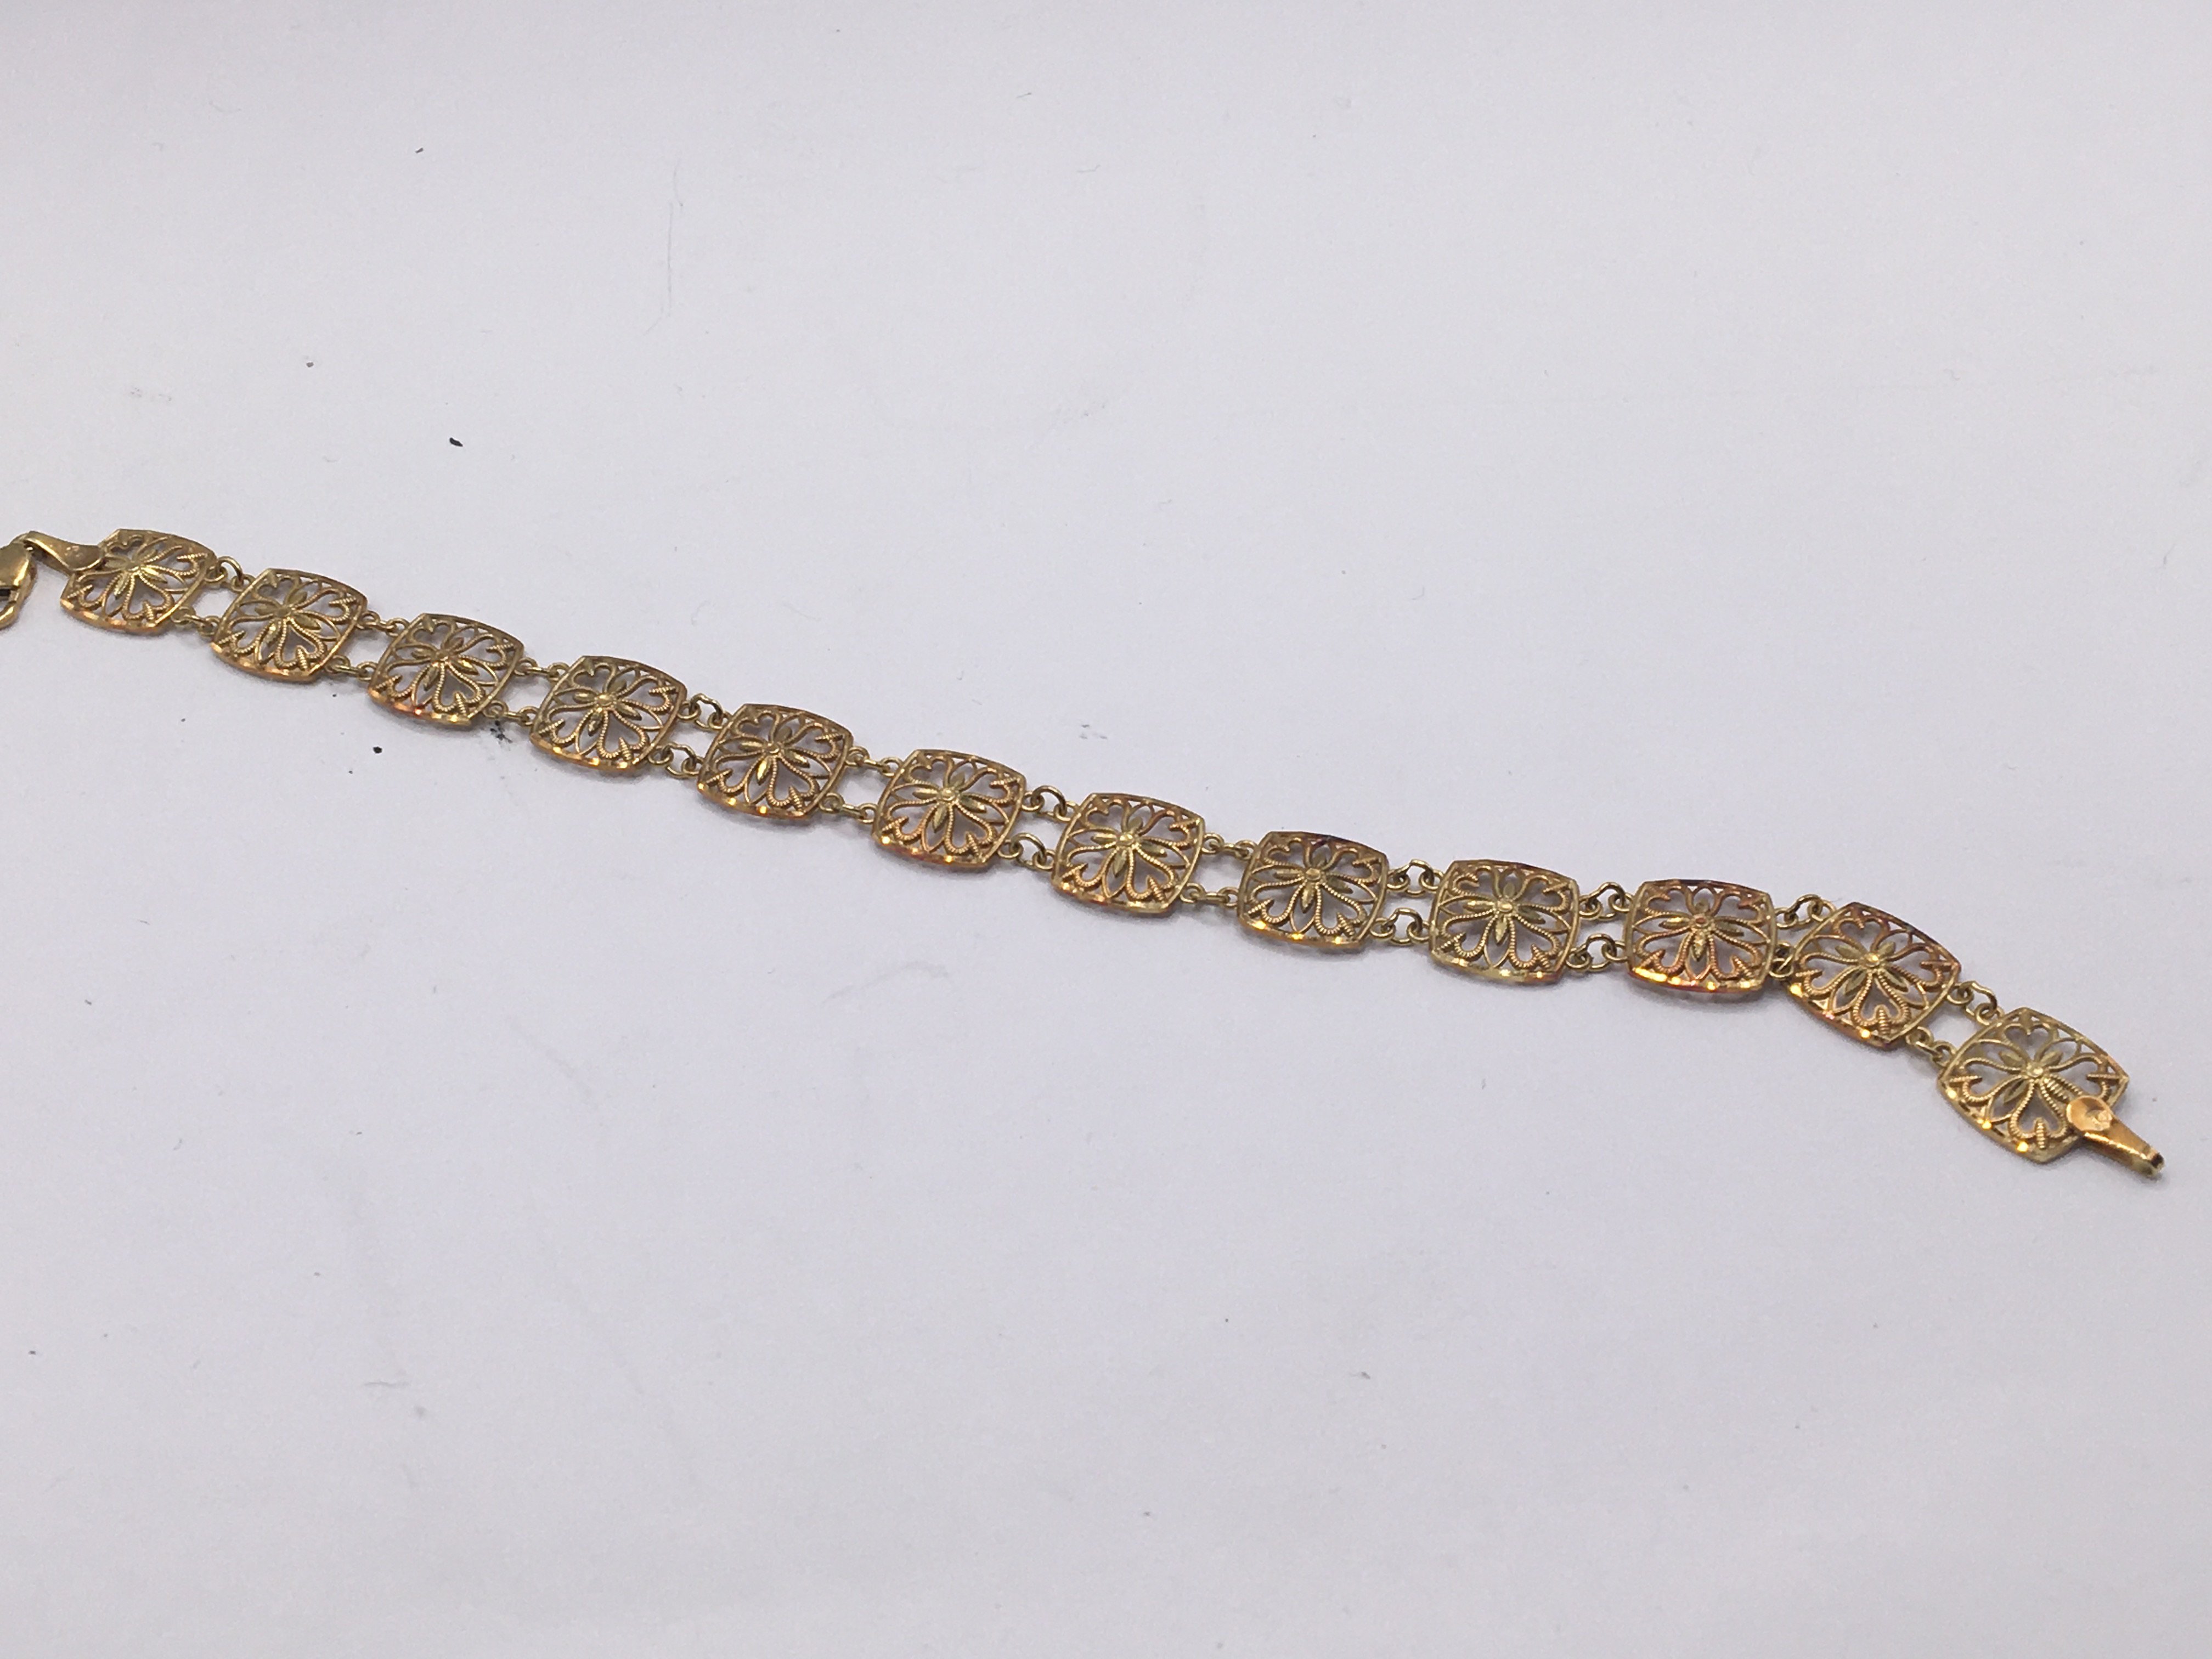 A 9carat gold QVC bracelet with open filigree type links weight 4.4g approximately - Image 2 of 2